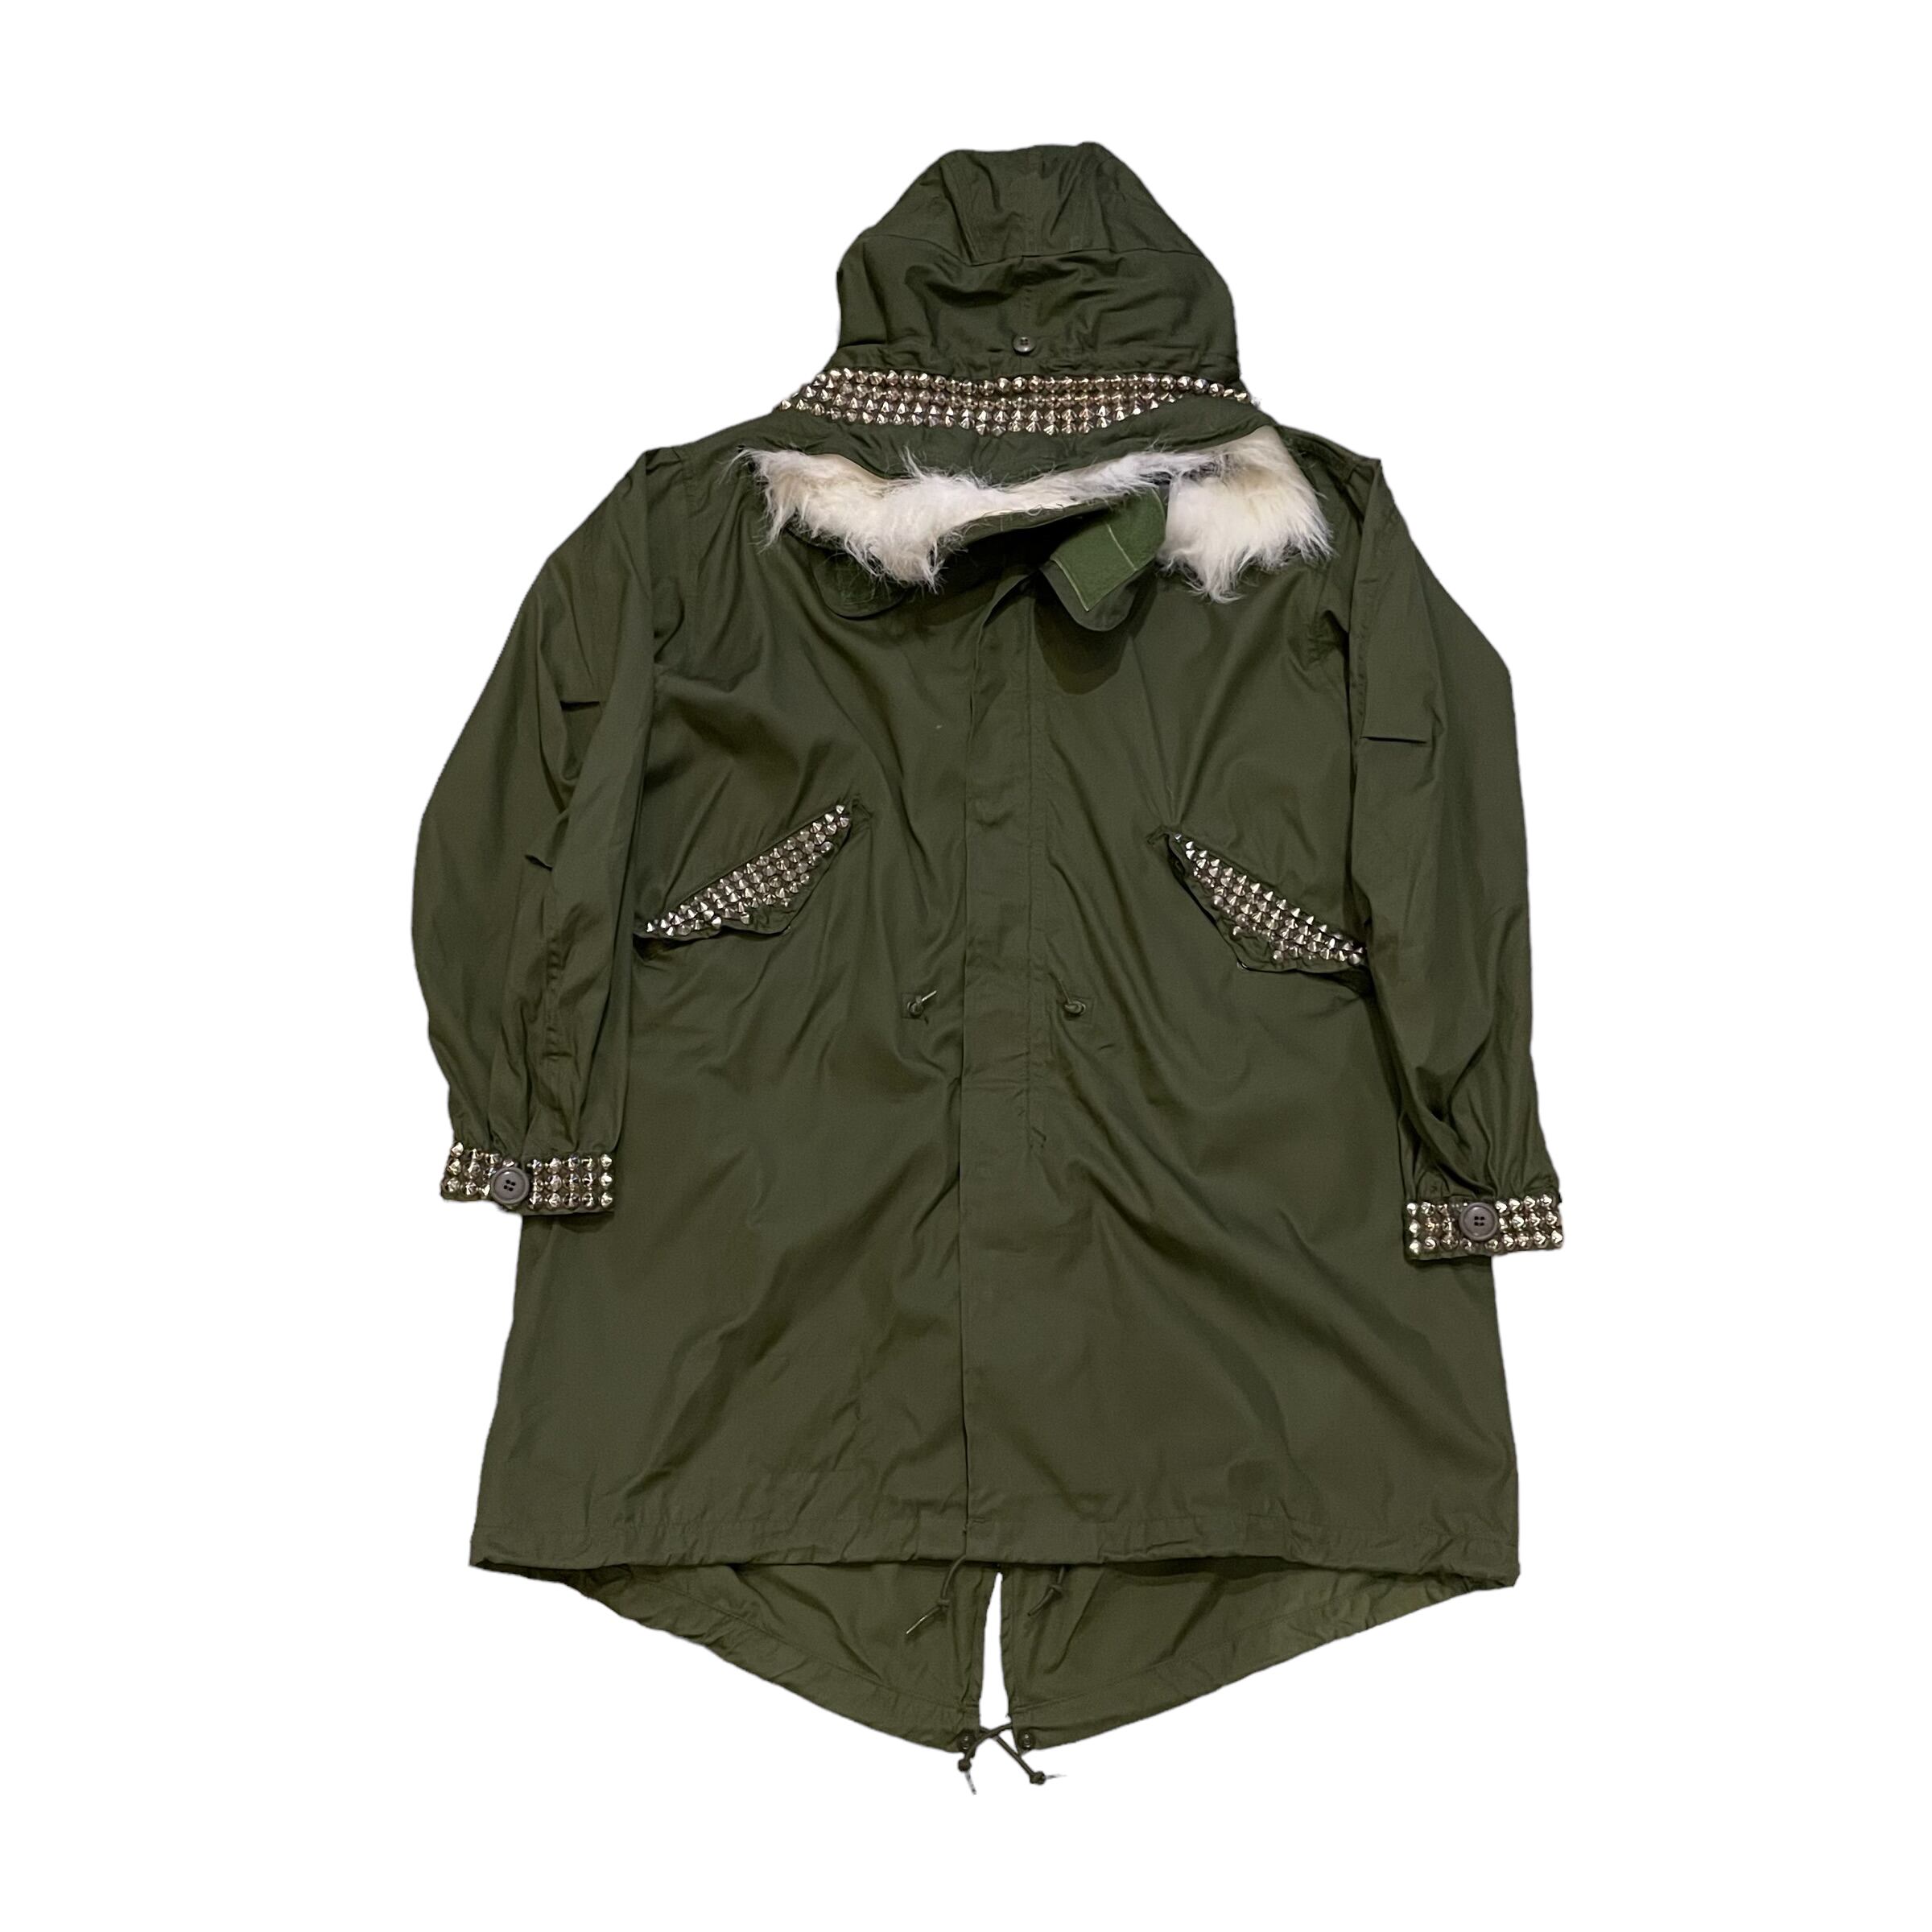 Special!! 70s U.S.ARMY M-65 fishtail parka 